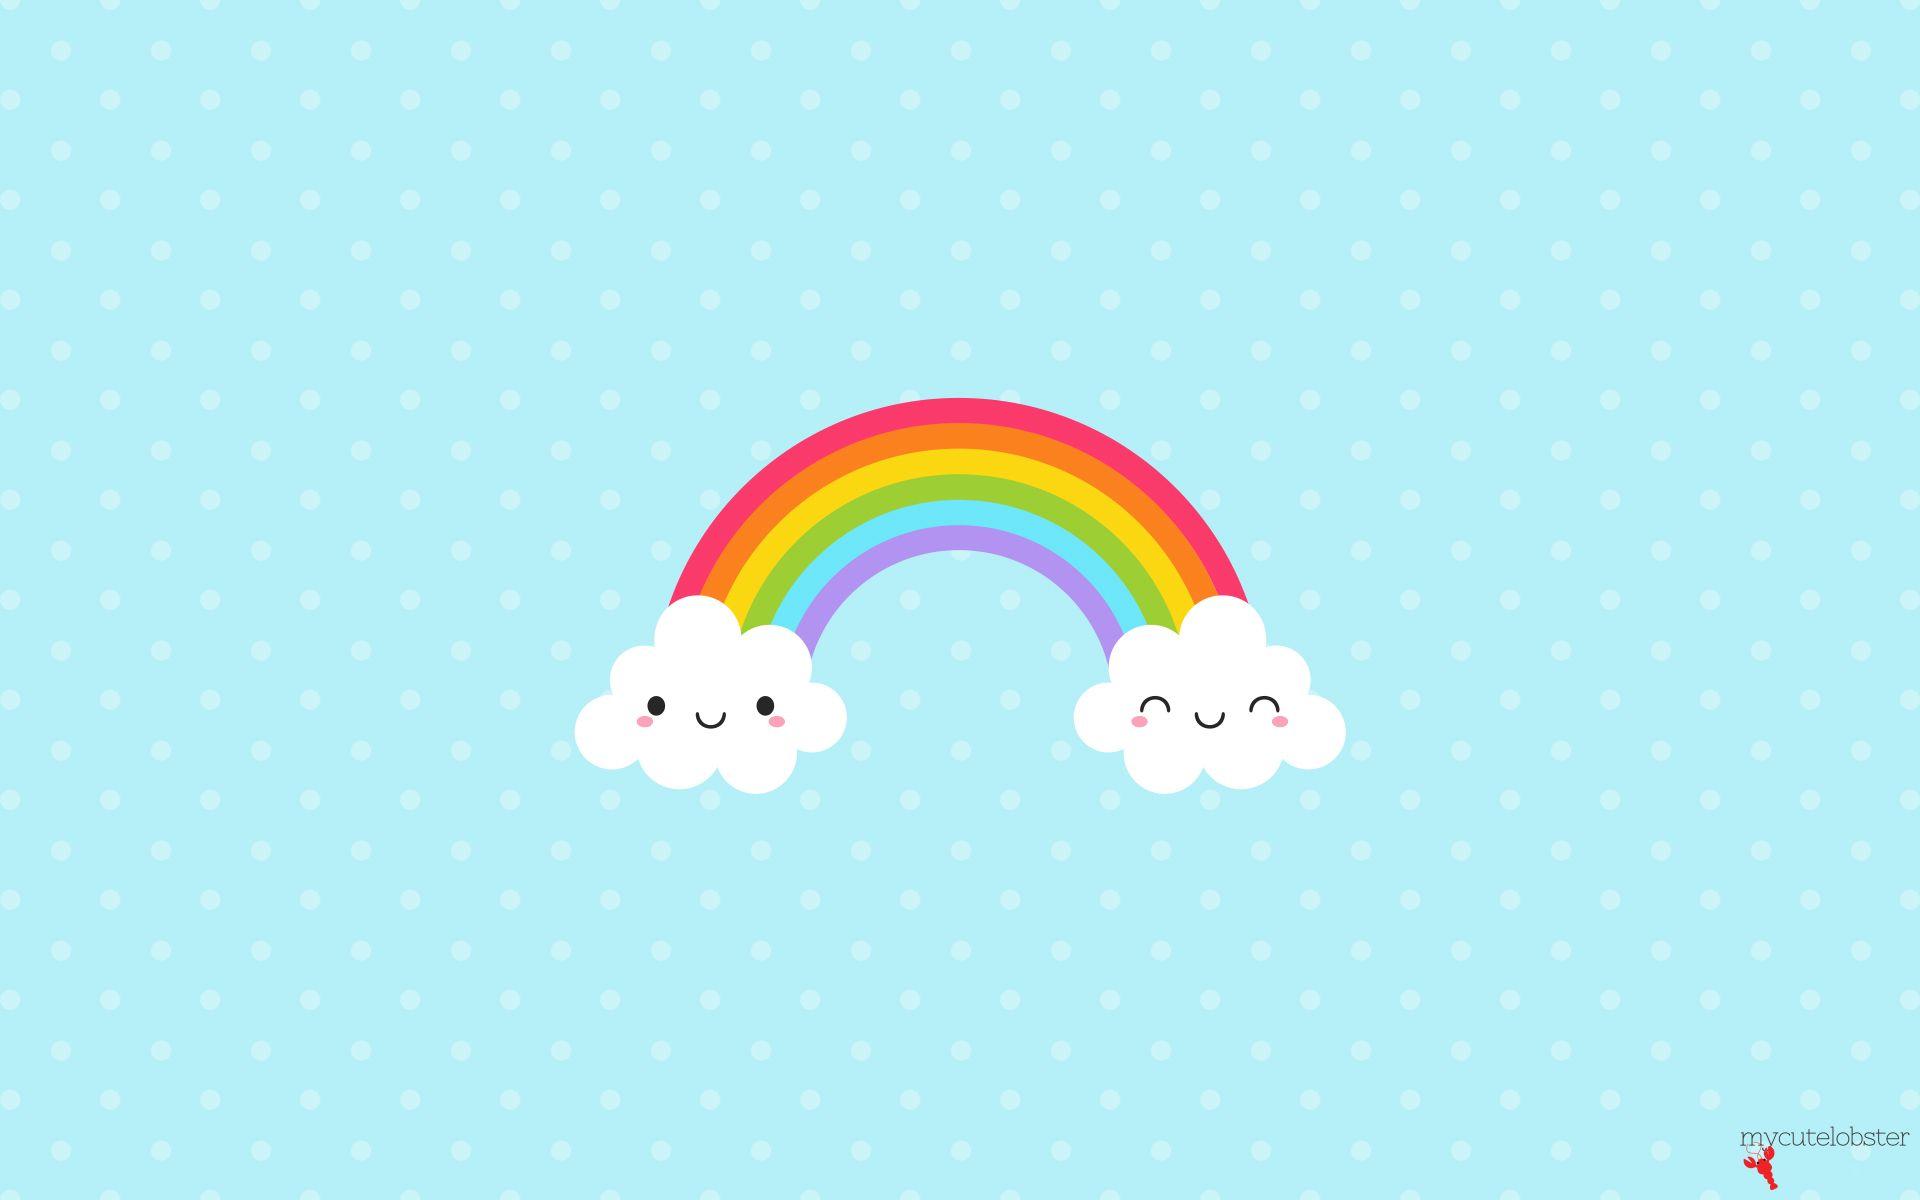 Cute rainbow wallpaper with a blue background and white dots - Rainbows